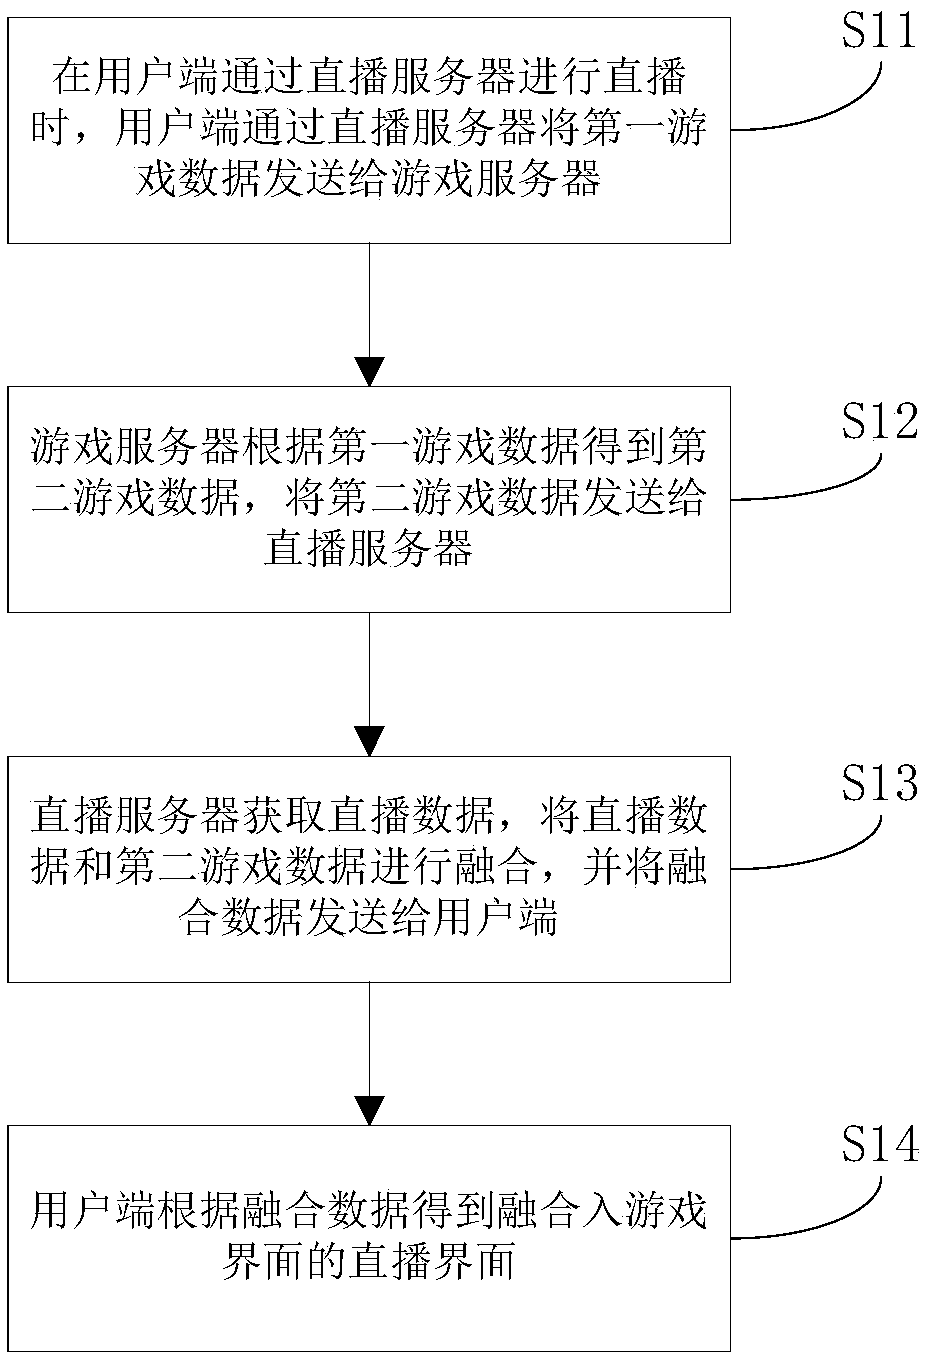 Live-streaming-based display method and game interaction system, and server